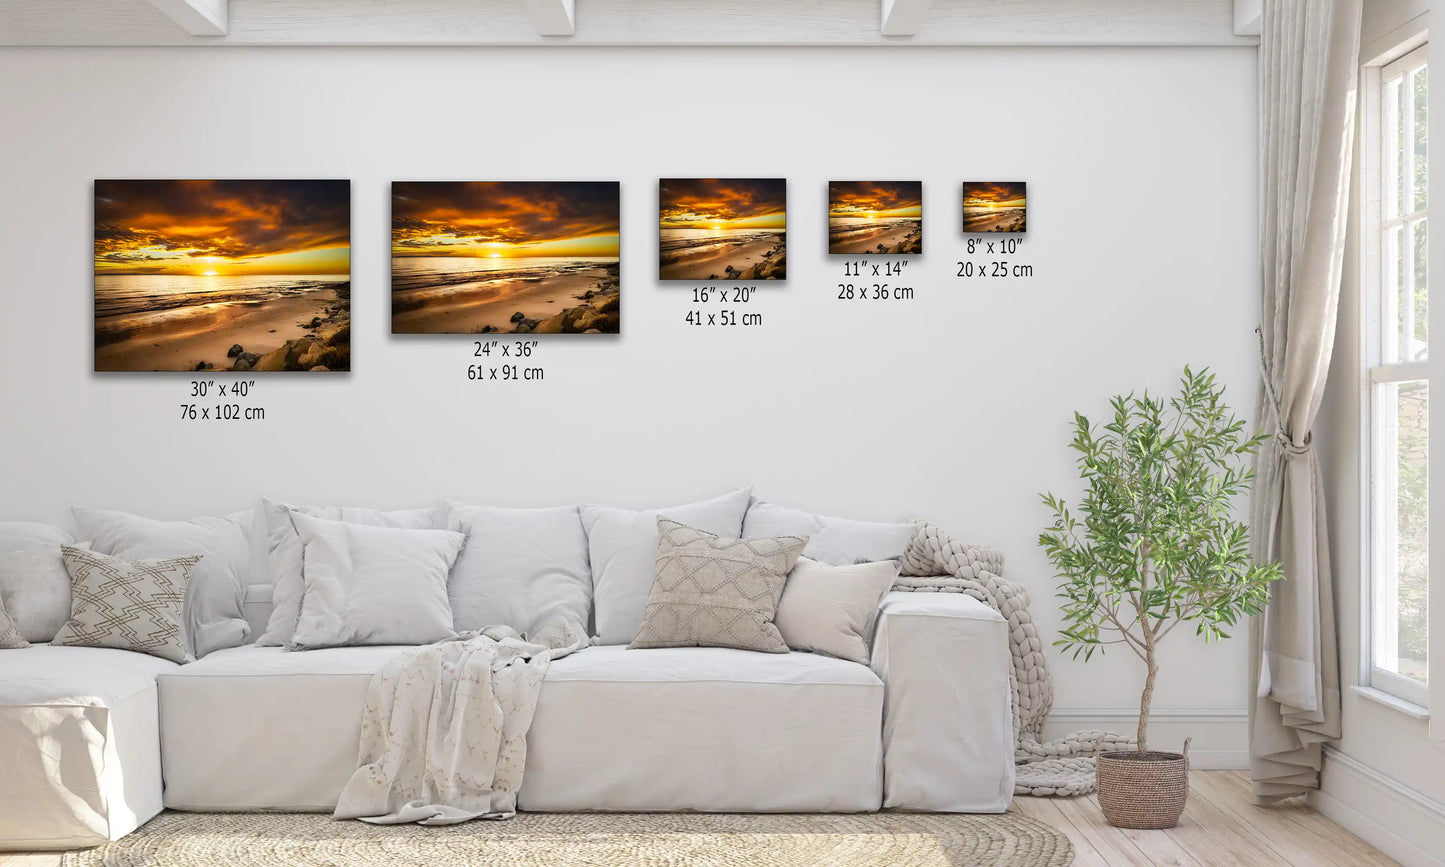 Varied sizes of wall art depict Hobson Beach sunset, each piece a serene escape, transforming interiors into a heavenly coastal retreat.